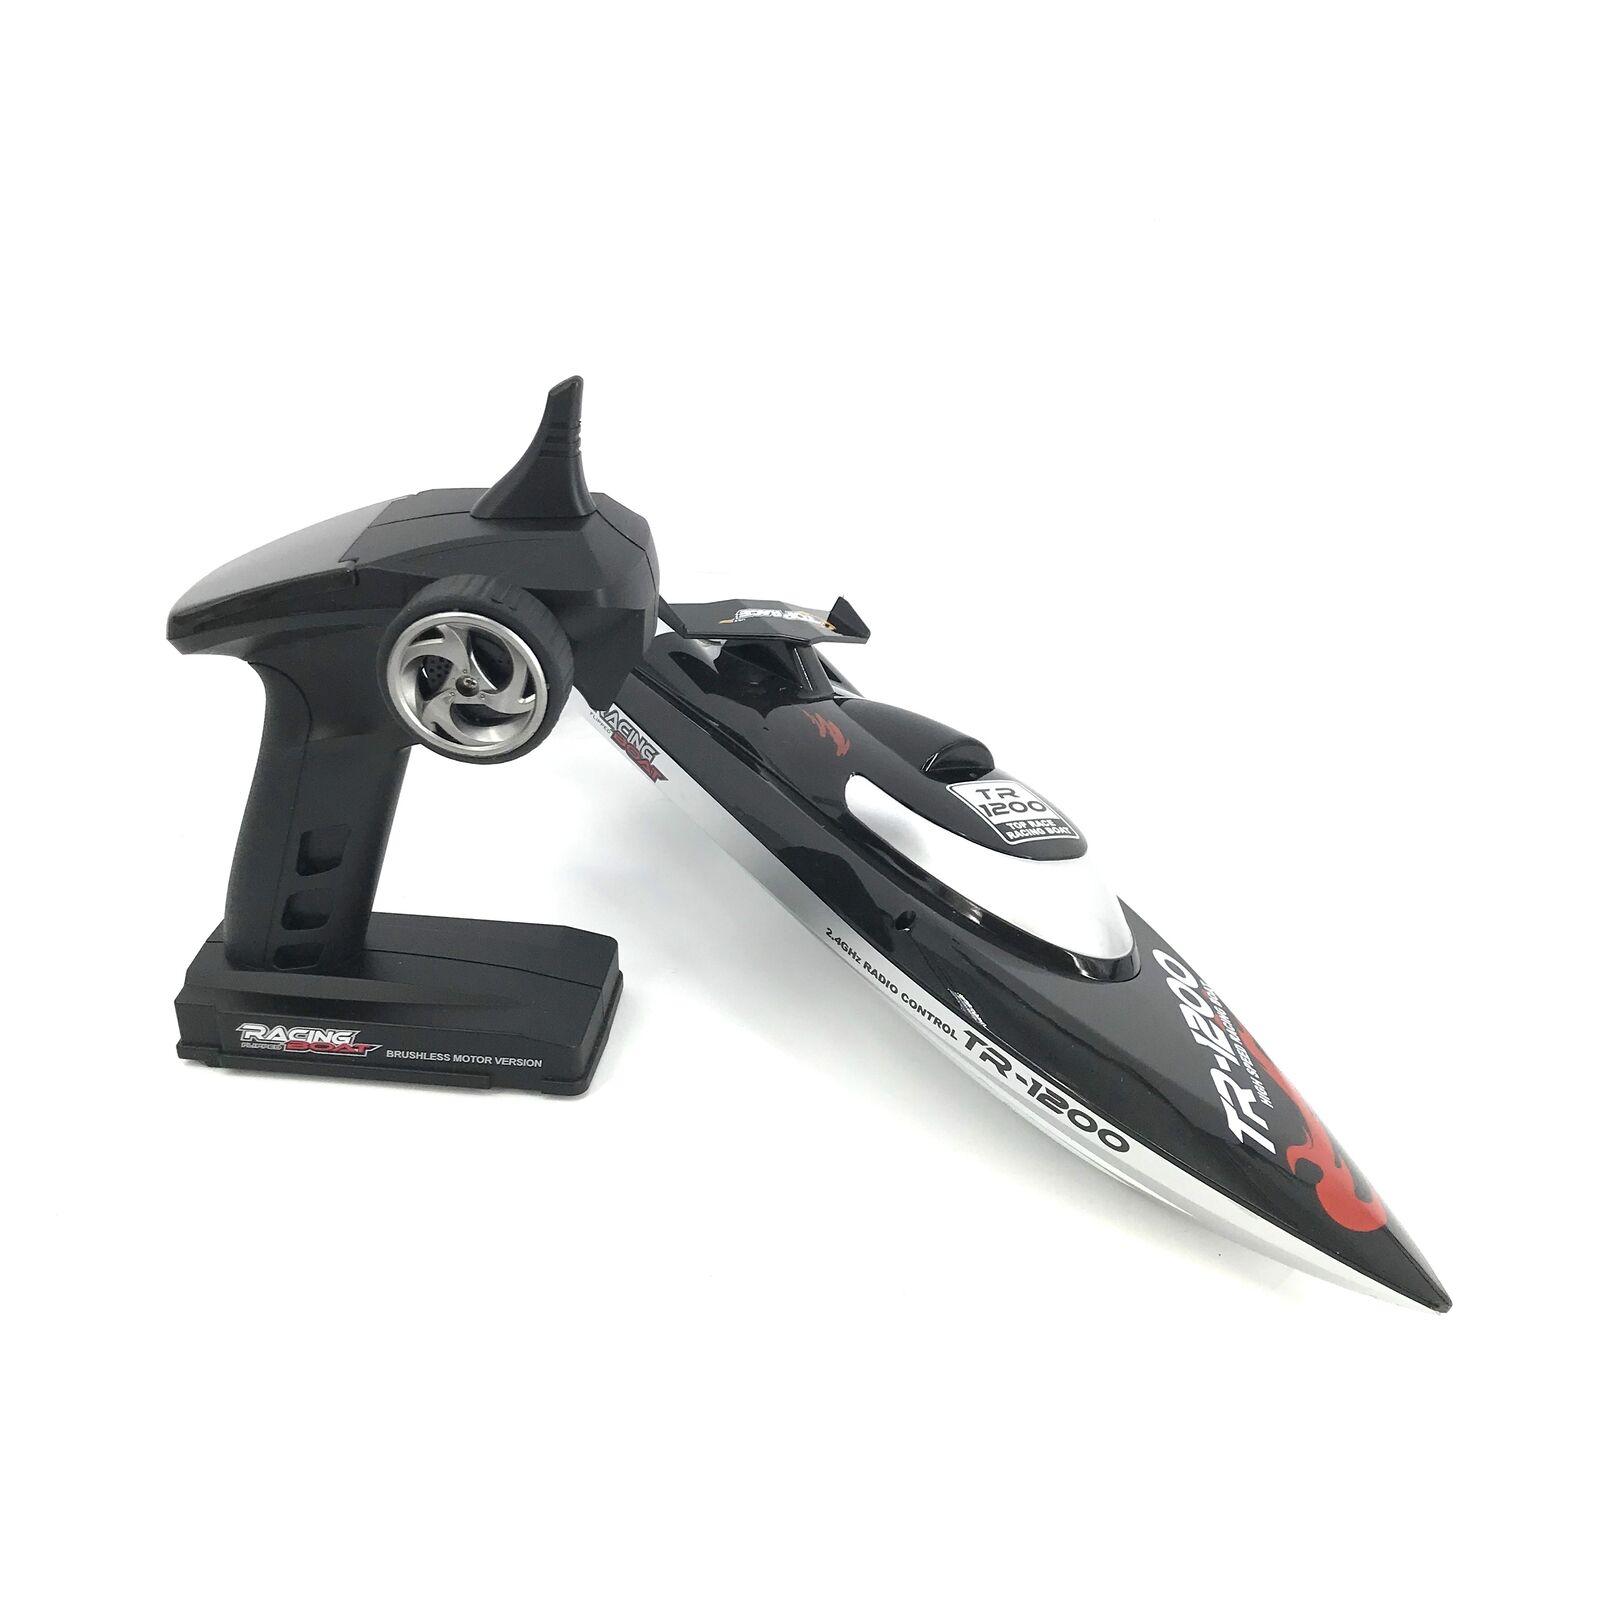 Tr 1200 Rc Boat: Top Performance RC Boating: The TR 1200 is Built for Speed and Precision